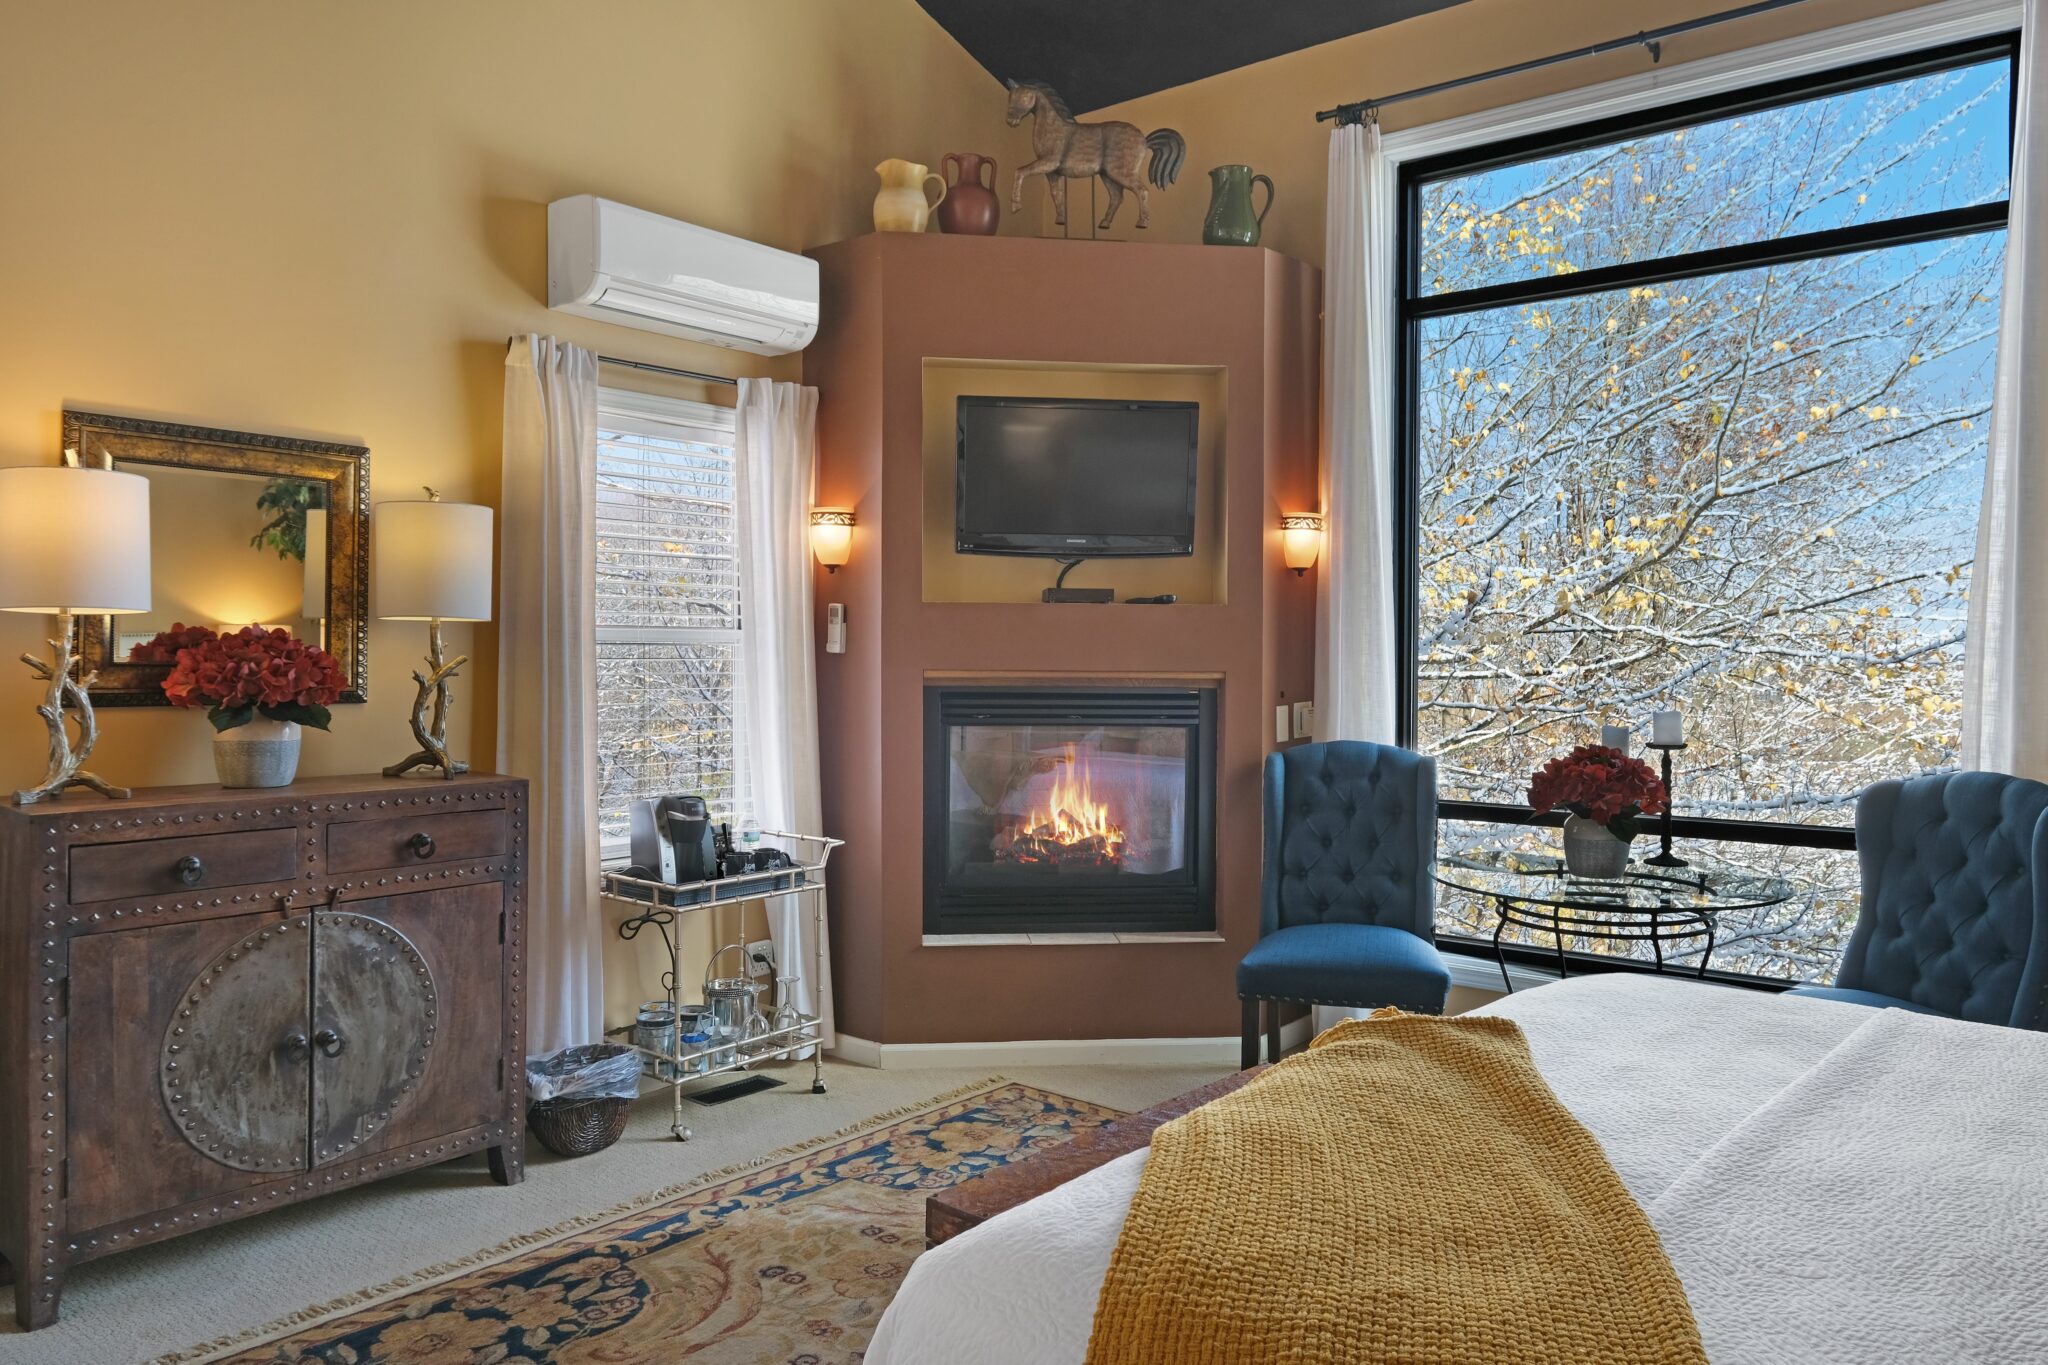 King Arthur Room with Fireplace, Flat screen TV, and Large Window